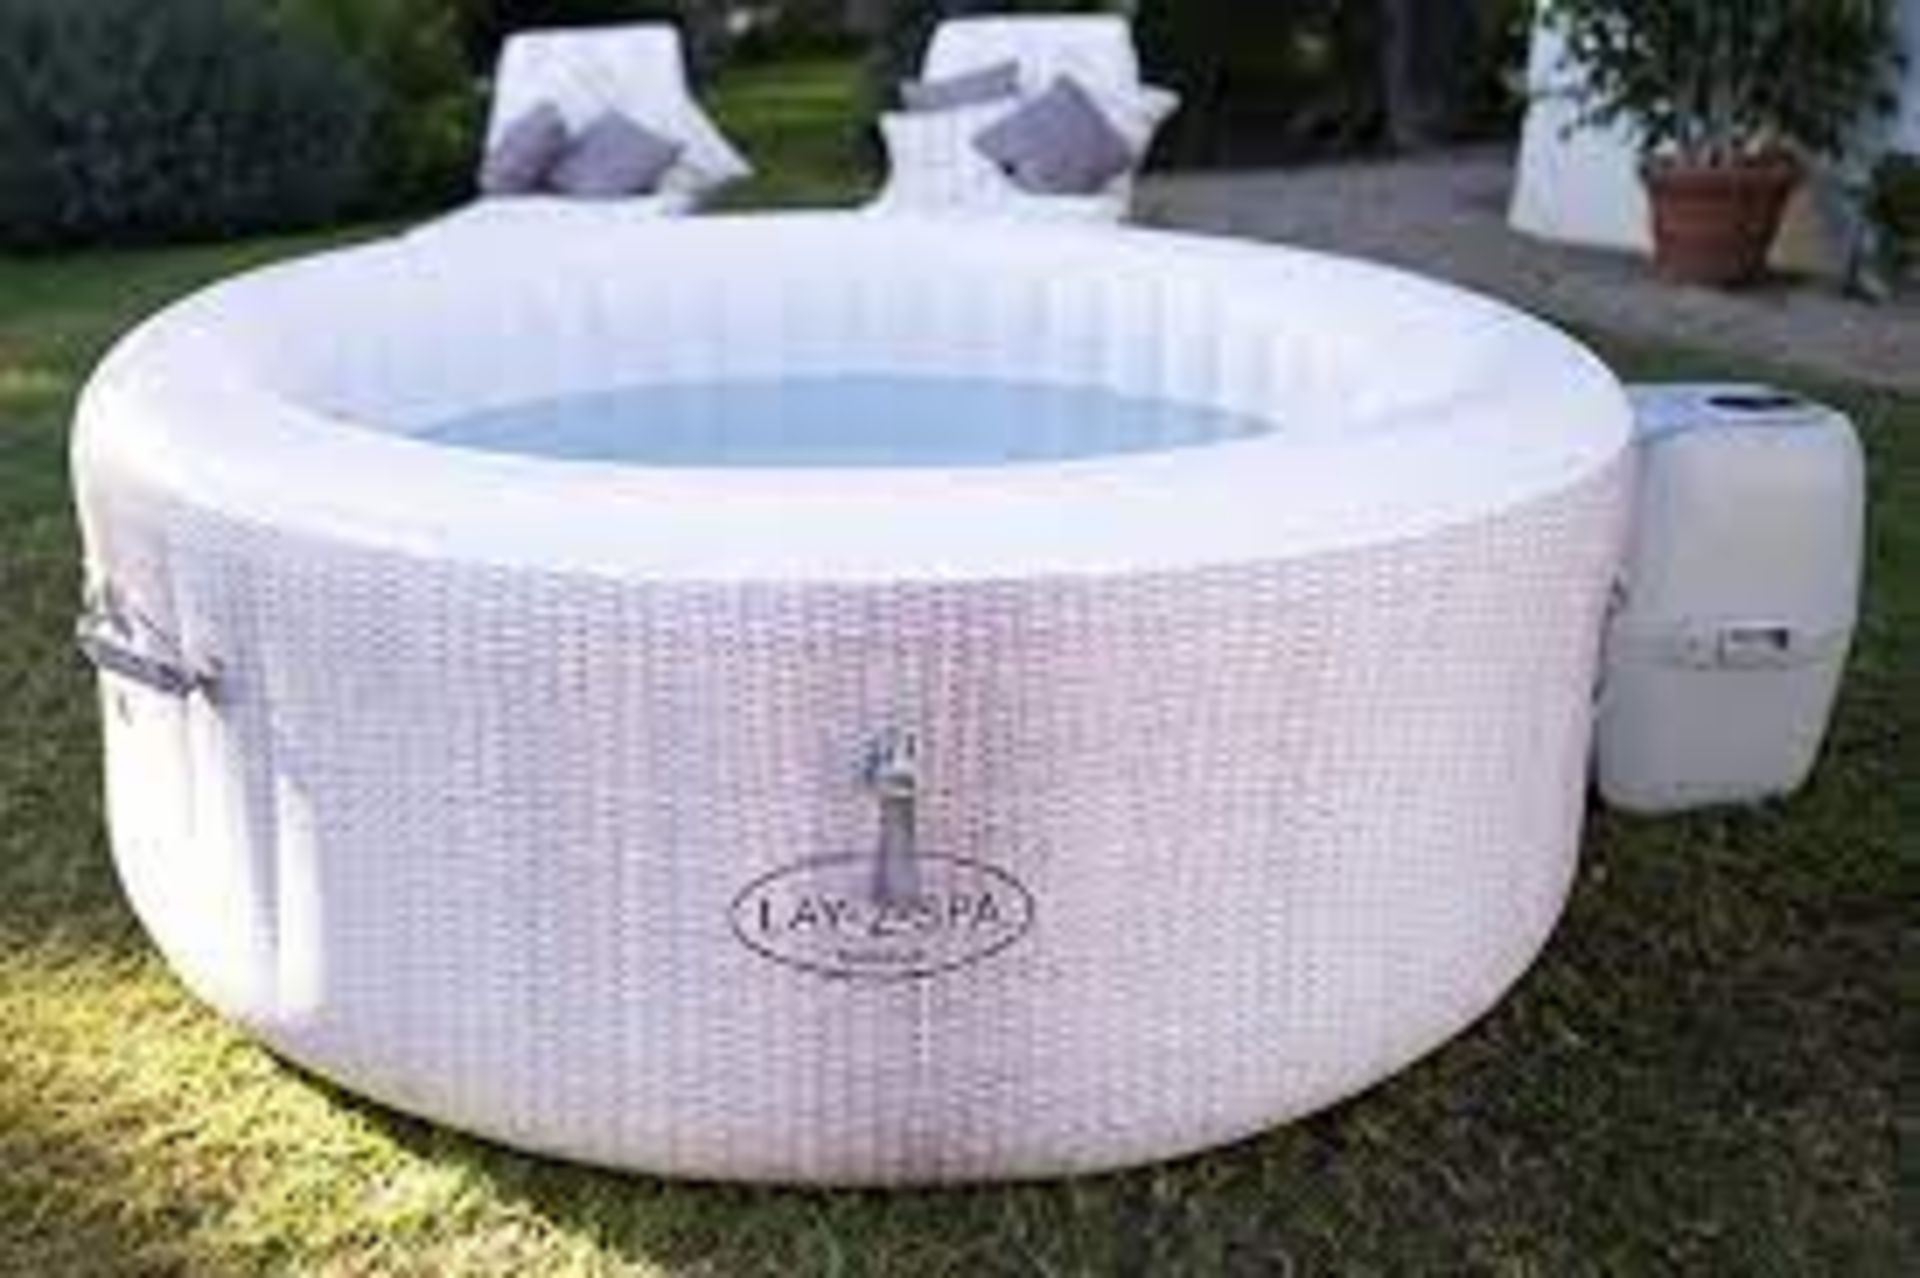 Lay-Z Spa Cancun AirJet. RRP £729.00. Revitalise your body and mind in water temperatures of up to